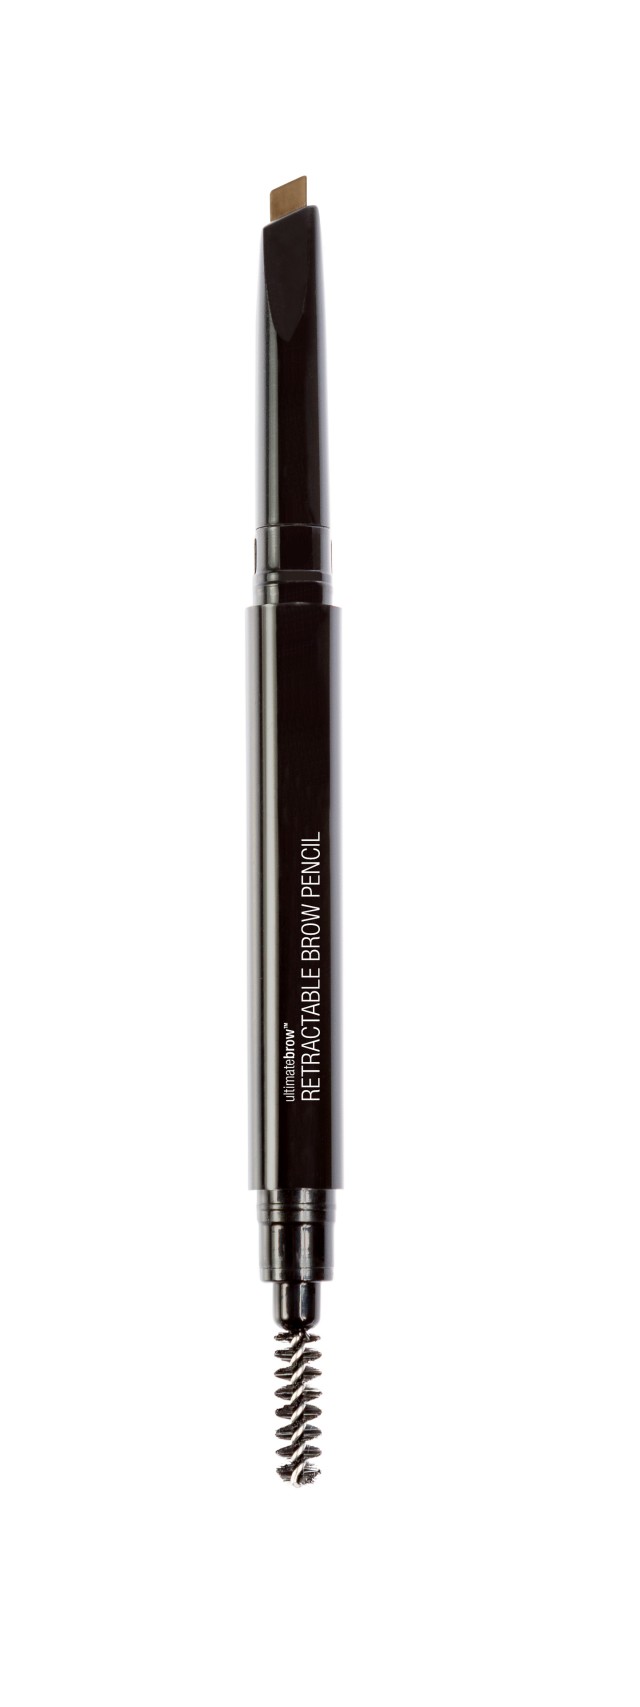 Wet n Wild Ultimate brow retractable pencil Taupe 0.2g